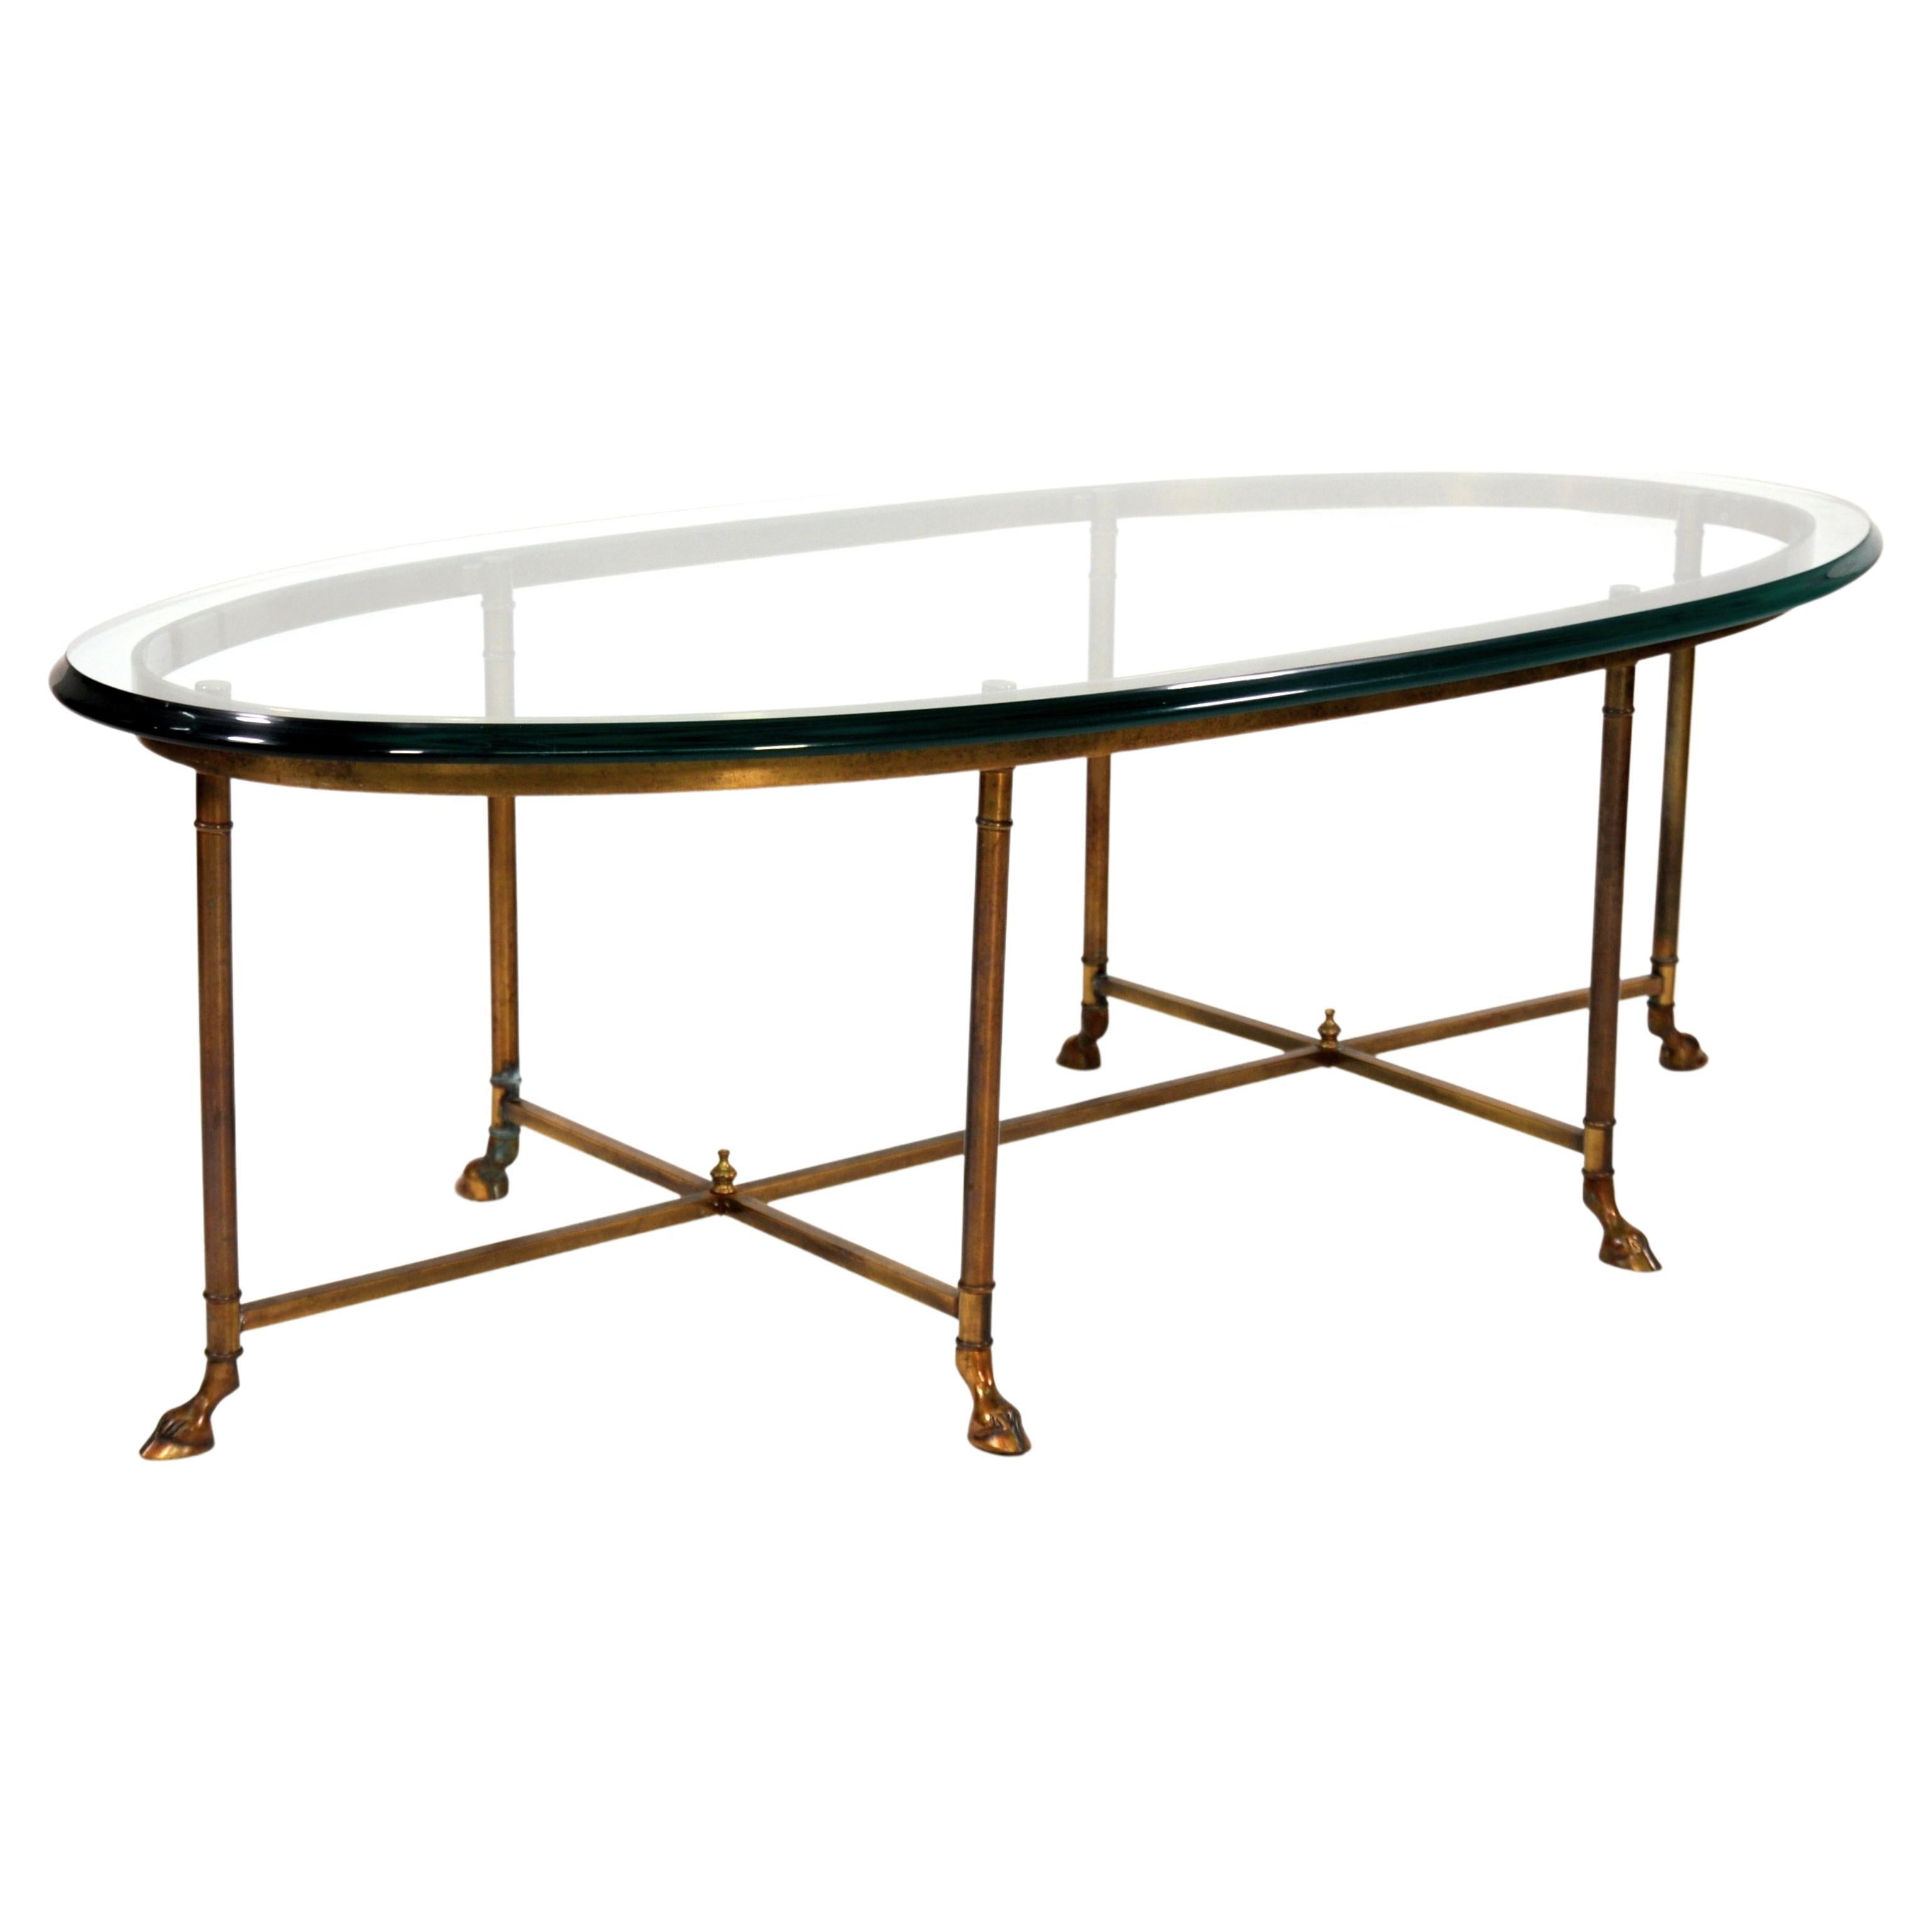 A gorgeous vintage La Barge solid brass oval cocktail table with beveled glass top. The coffee table features ram's feet and double cross stretchers with shaped finials. The brass has beautiful, rich patina. A wonderful addition to any traditional